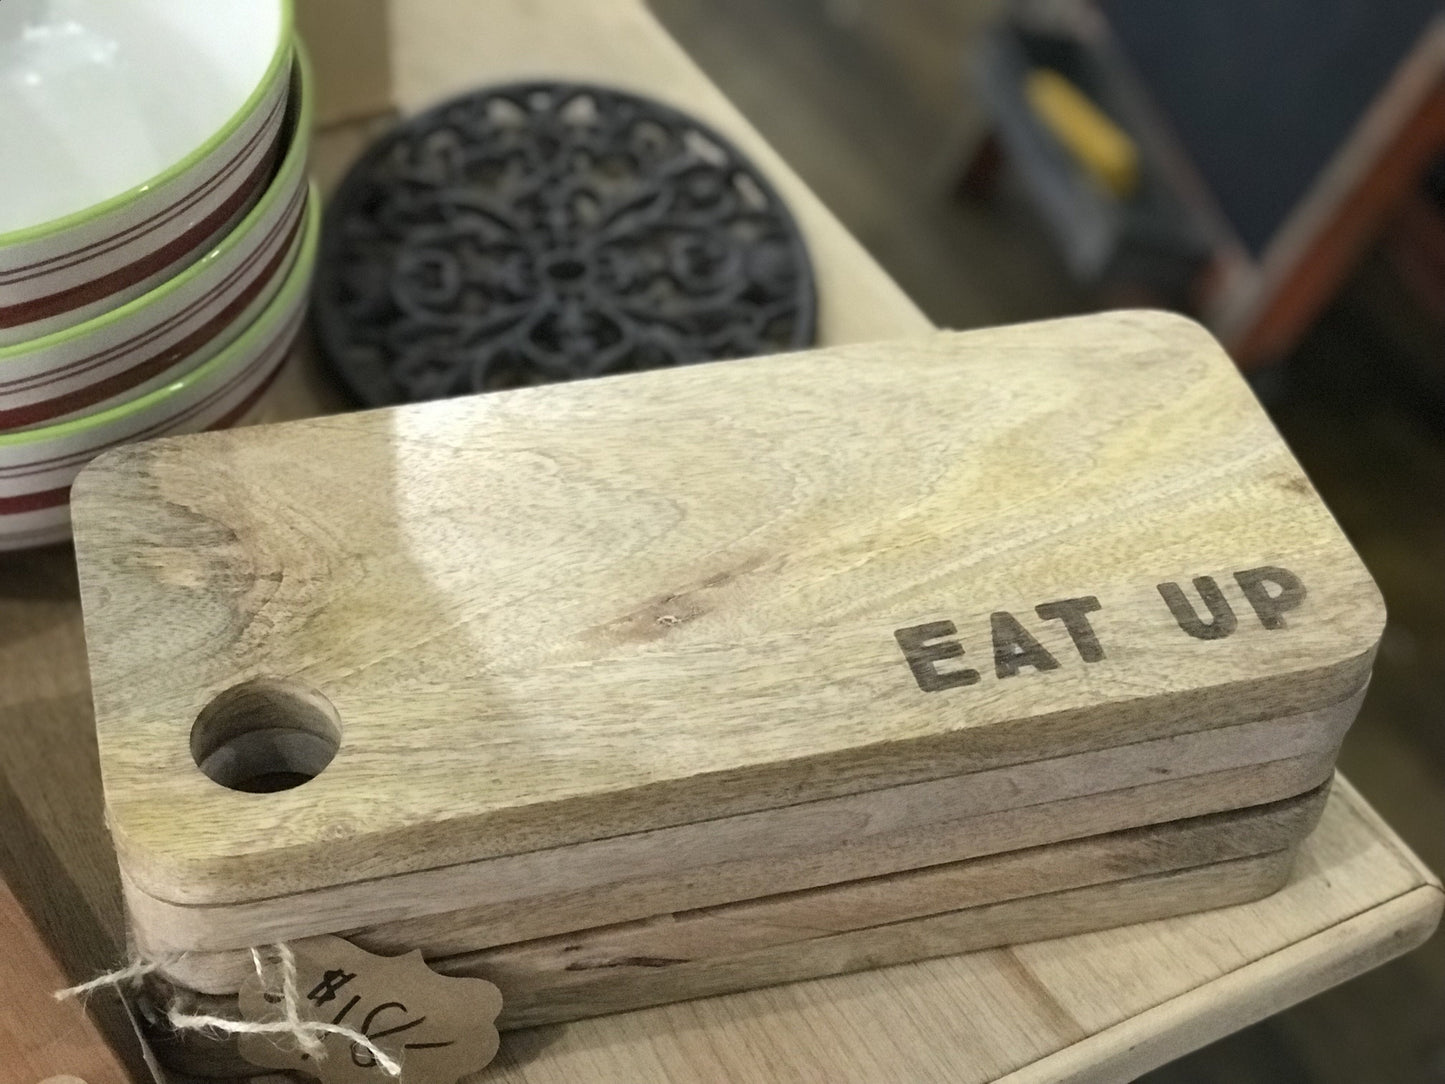 “Eat Up” Paulownia Wood Serving Board, approx 12 inches long